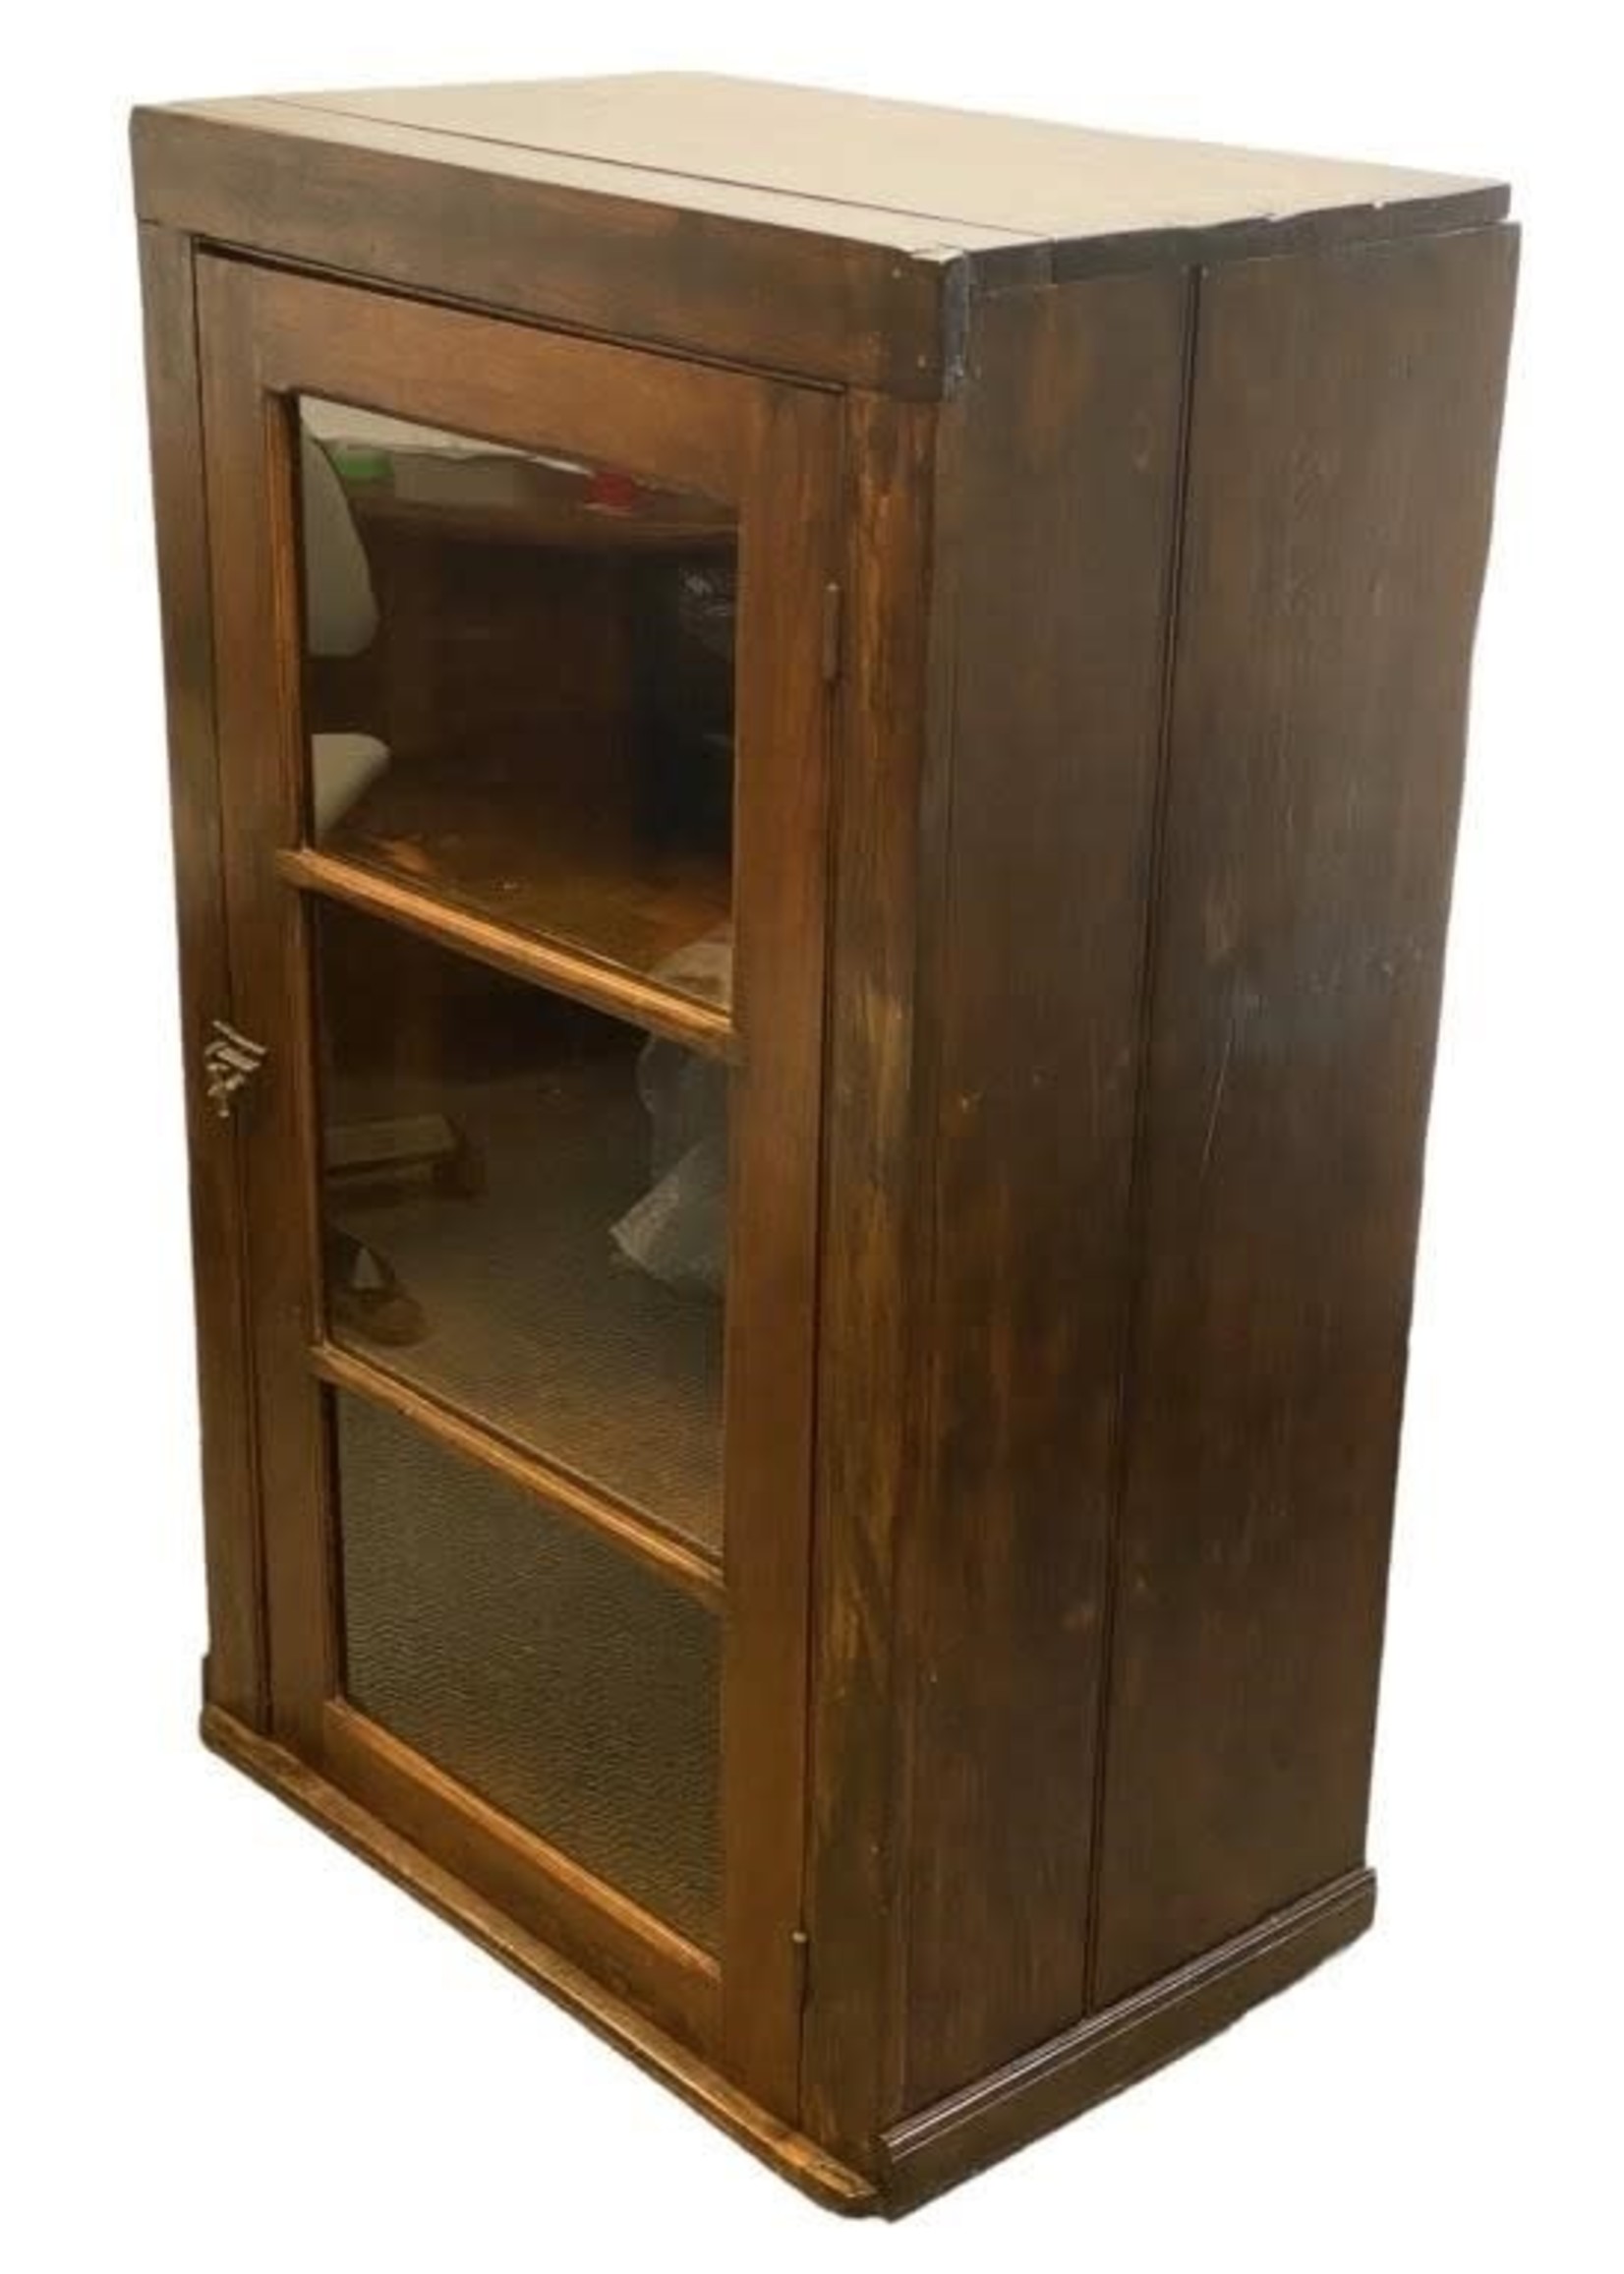 Primitive Pine Country Cupboard - PICK UP ONLY